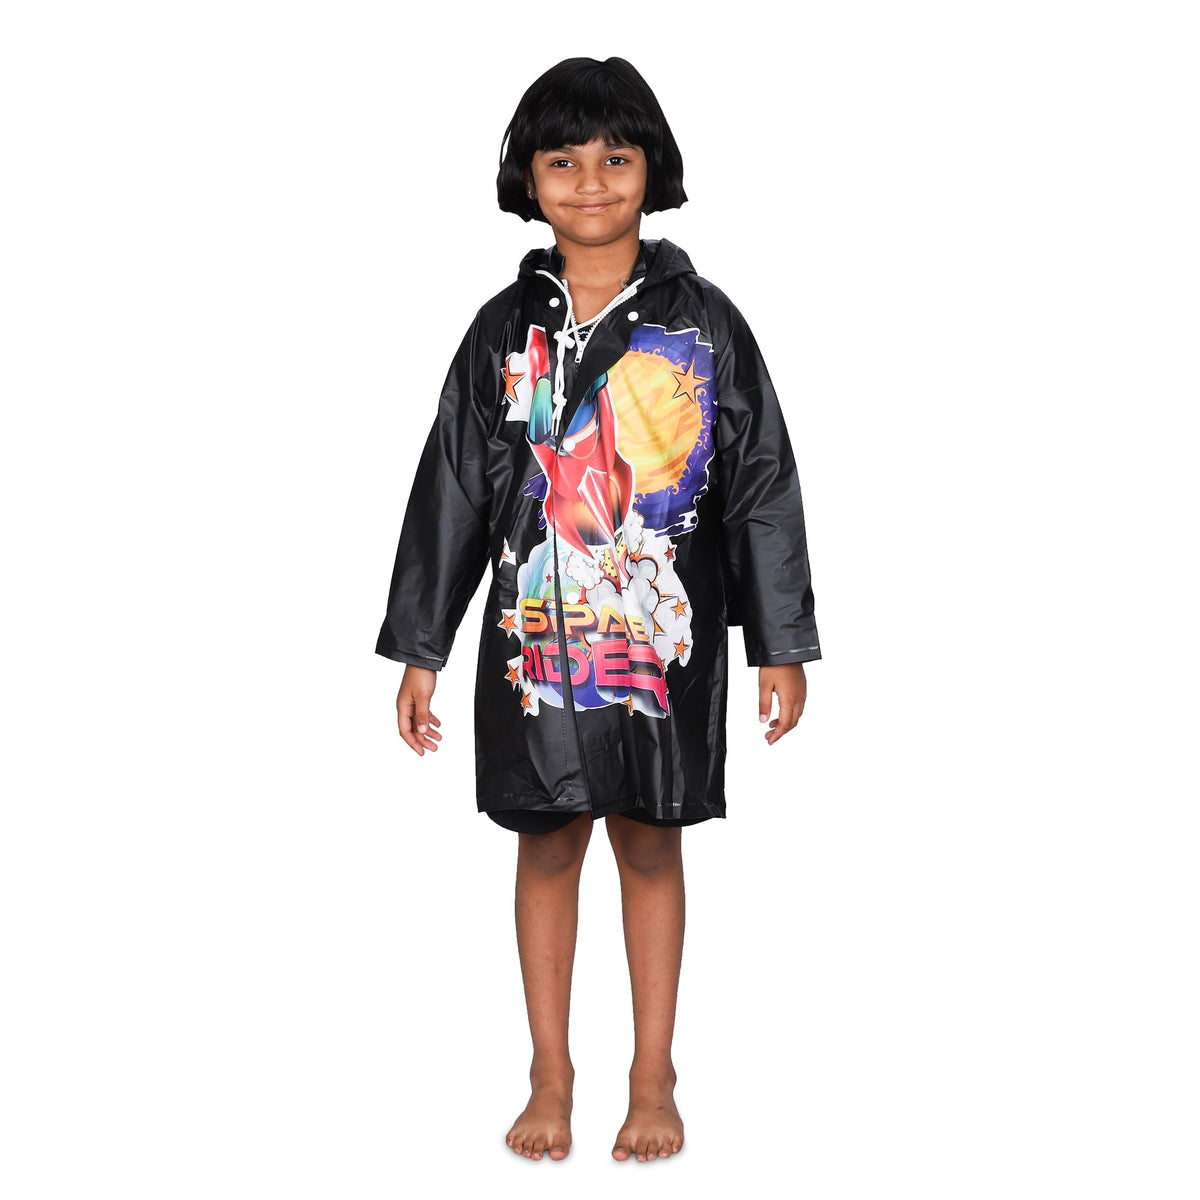 THE CLOWNFISH Toon Caper Series Kids Waterproof PVC Longcoat with Adjustable Hood & Extra Space for Backpack/Schoolbag Holding. Printed Plastic Pouch. Kid Age-5-6 years (Jet Black)